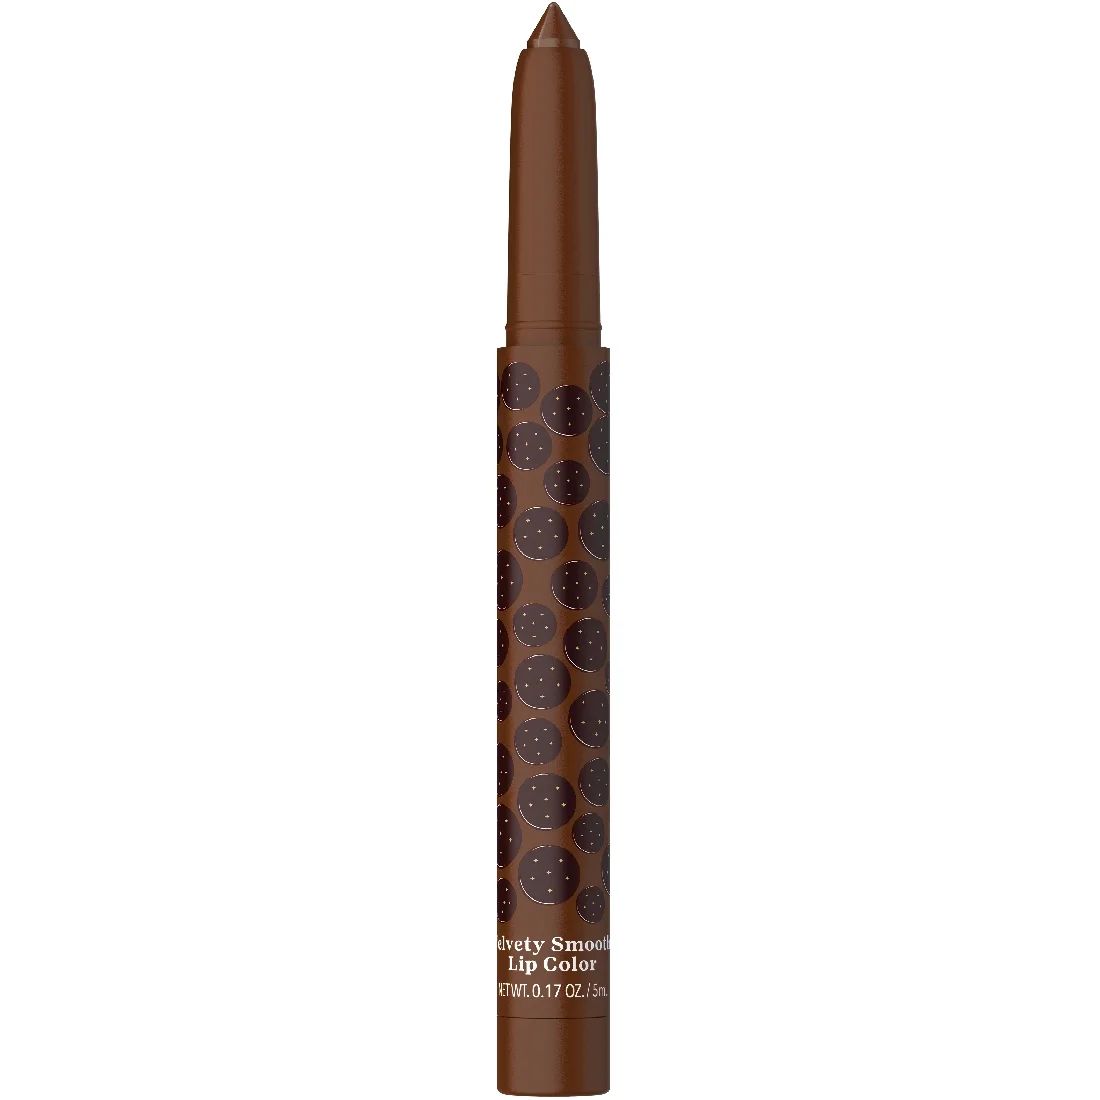 Hard Candy x Girl Scout Cookie Glaze Lip Marker, Nude Lipstick, Thin Mint-Scented | Walmart (US)